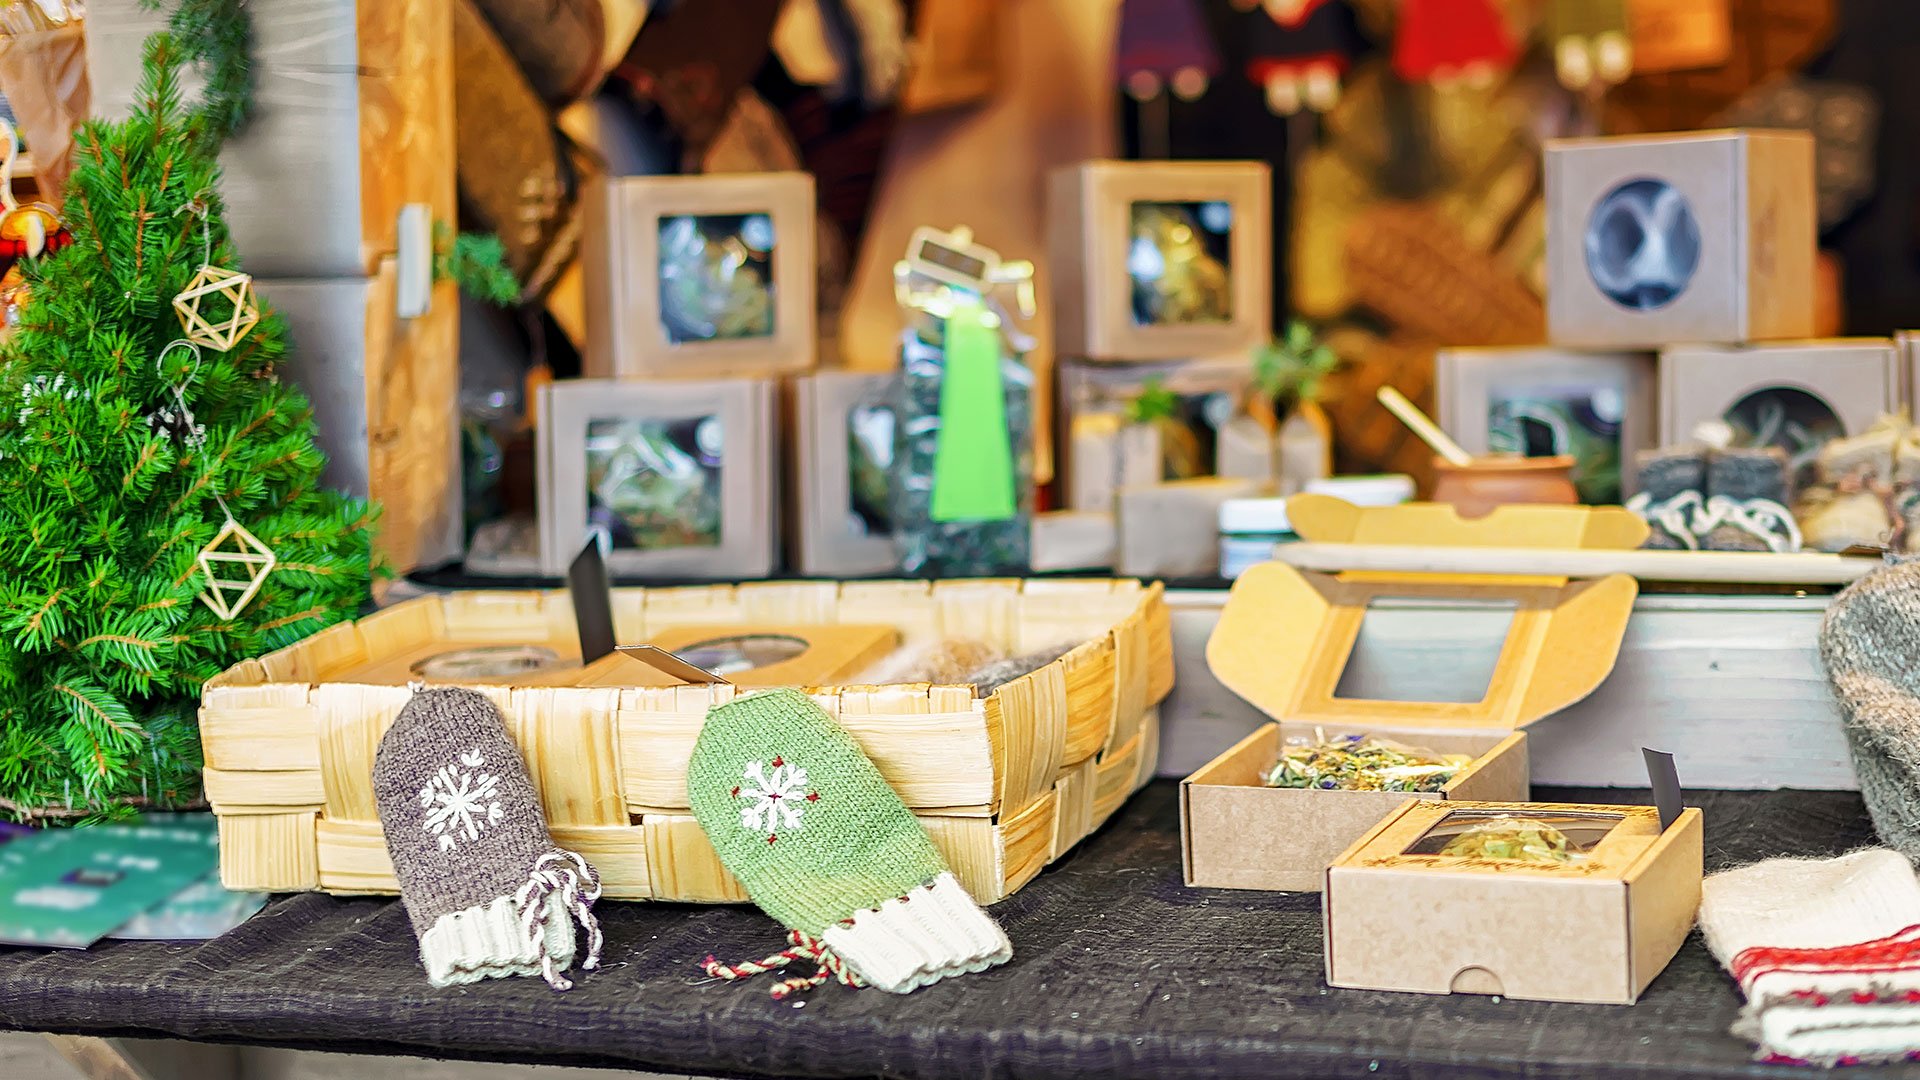 Best holiday craft fairs in the Greater Sacramento area